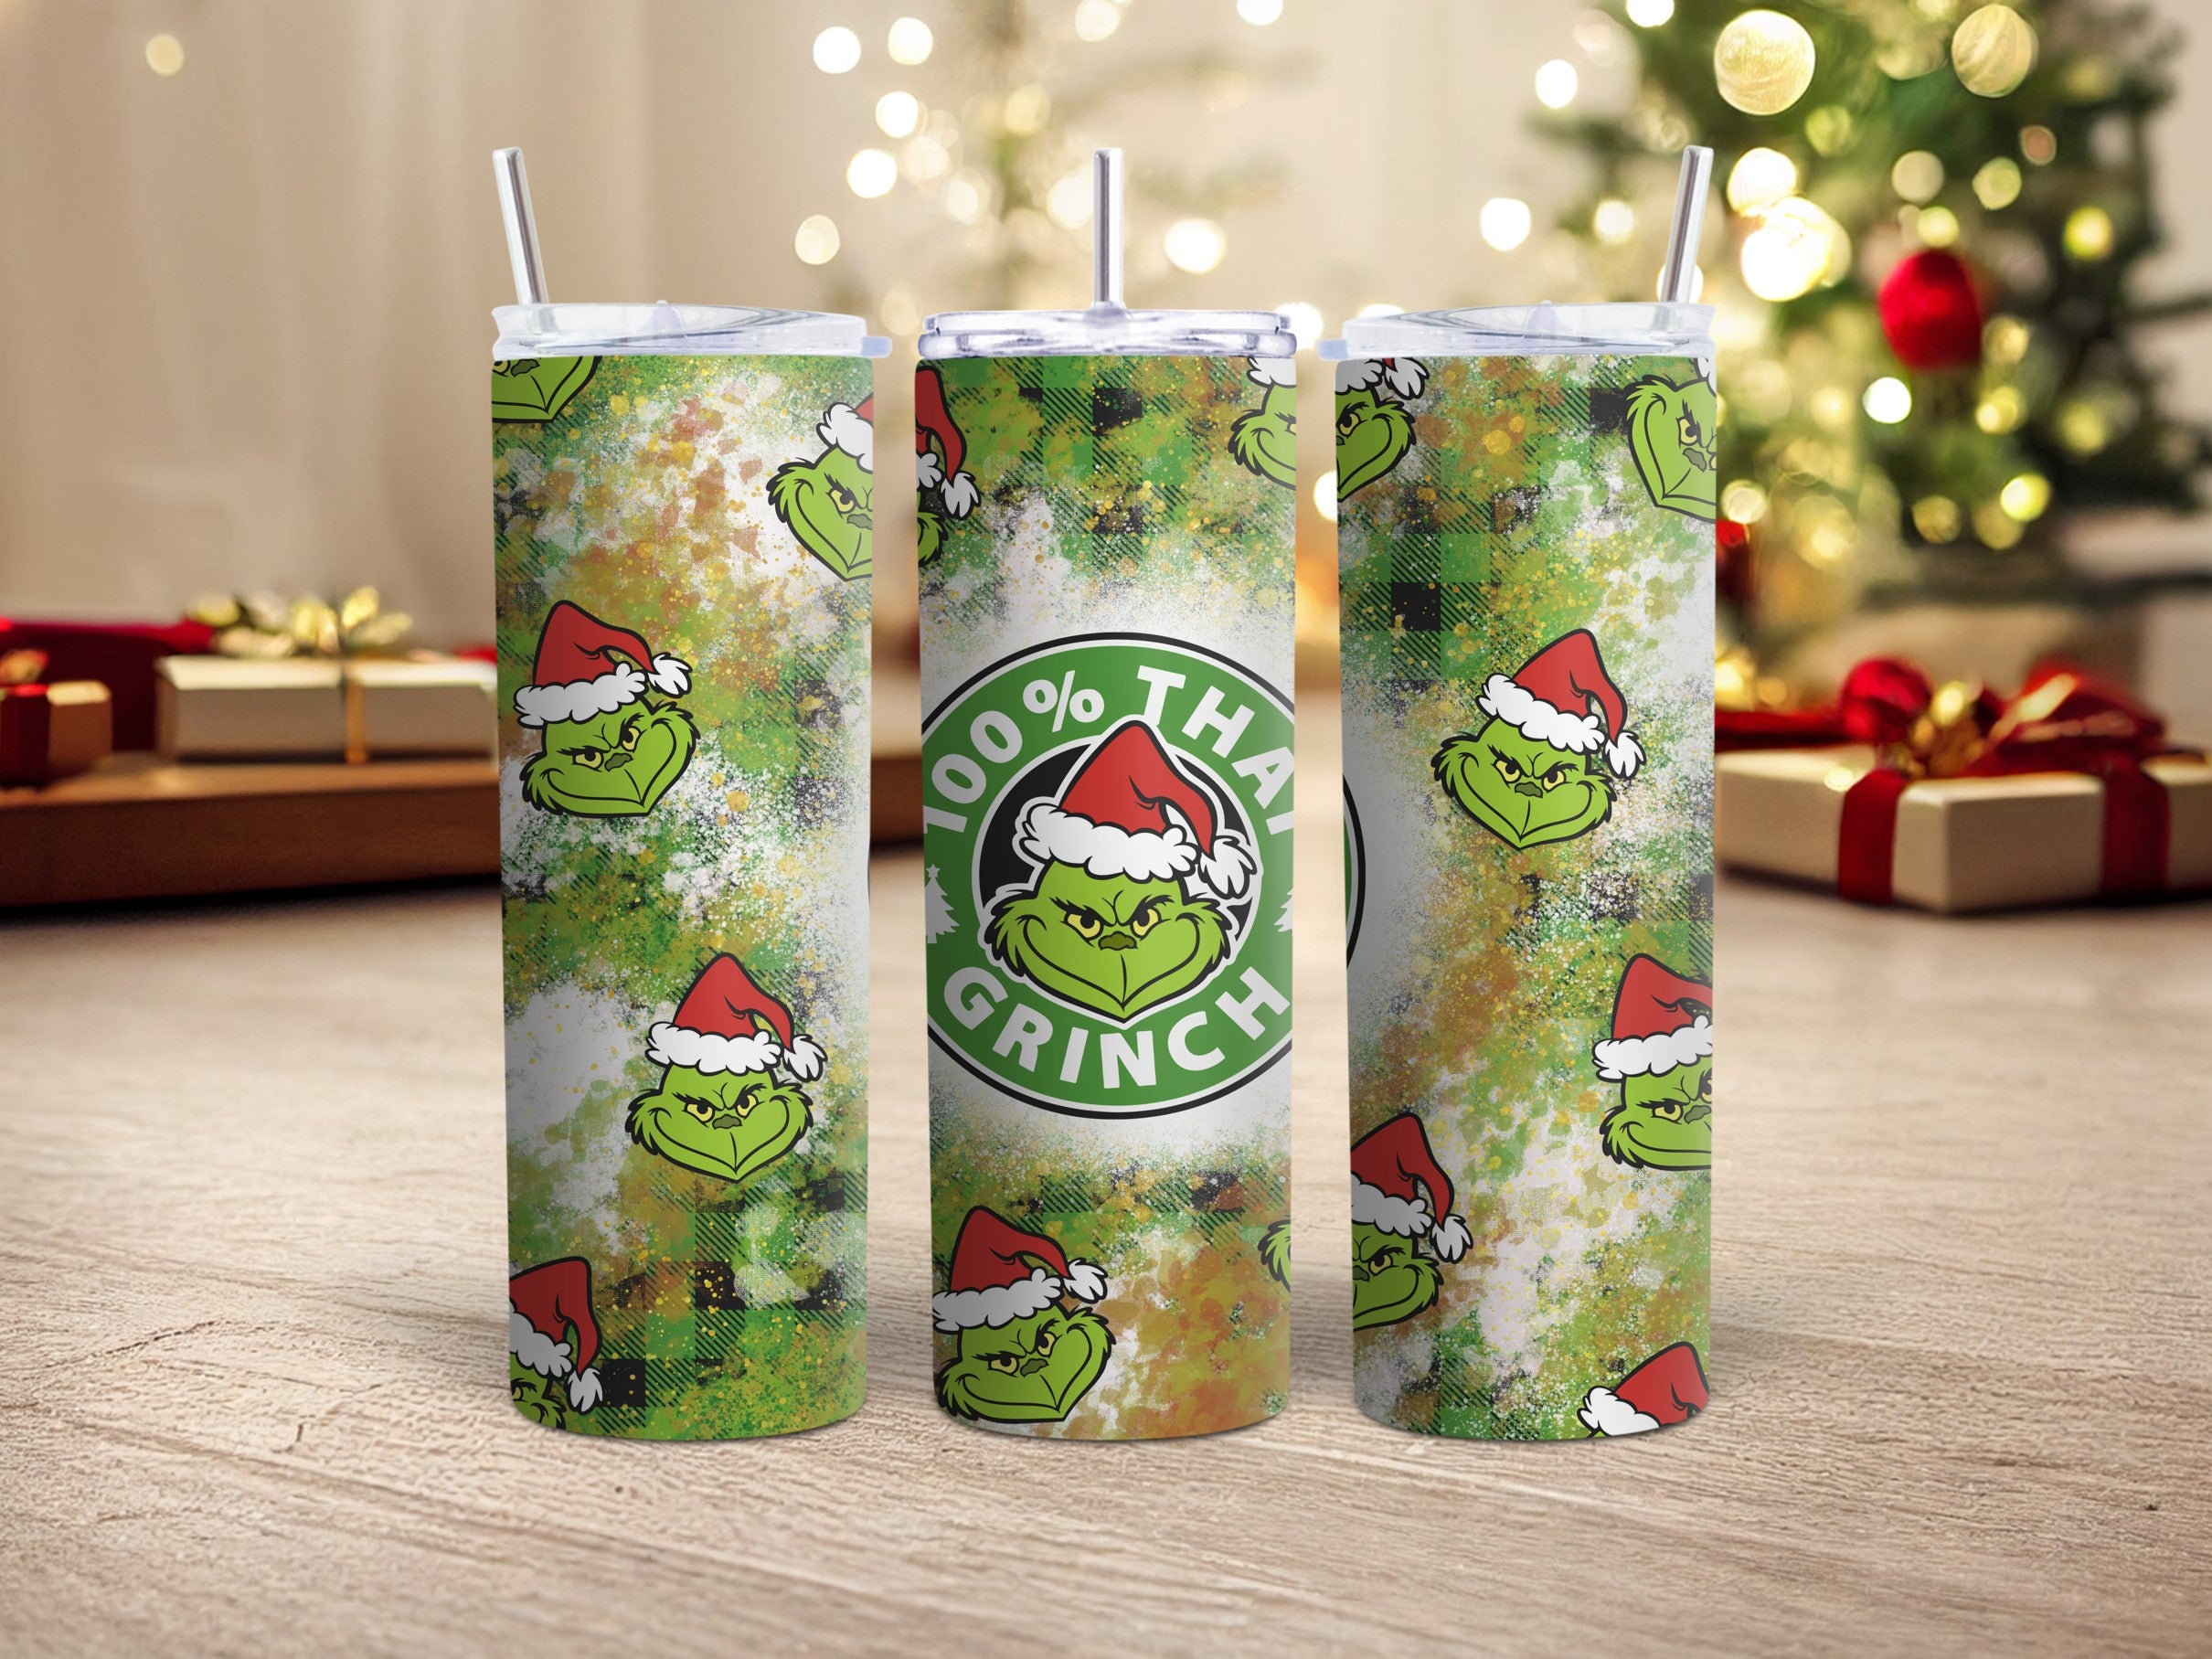 The Grinch, Dining, New The Grinch Green Tumbler Cup With Straw